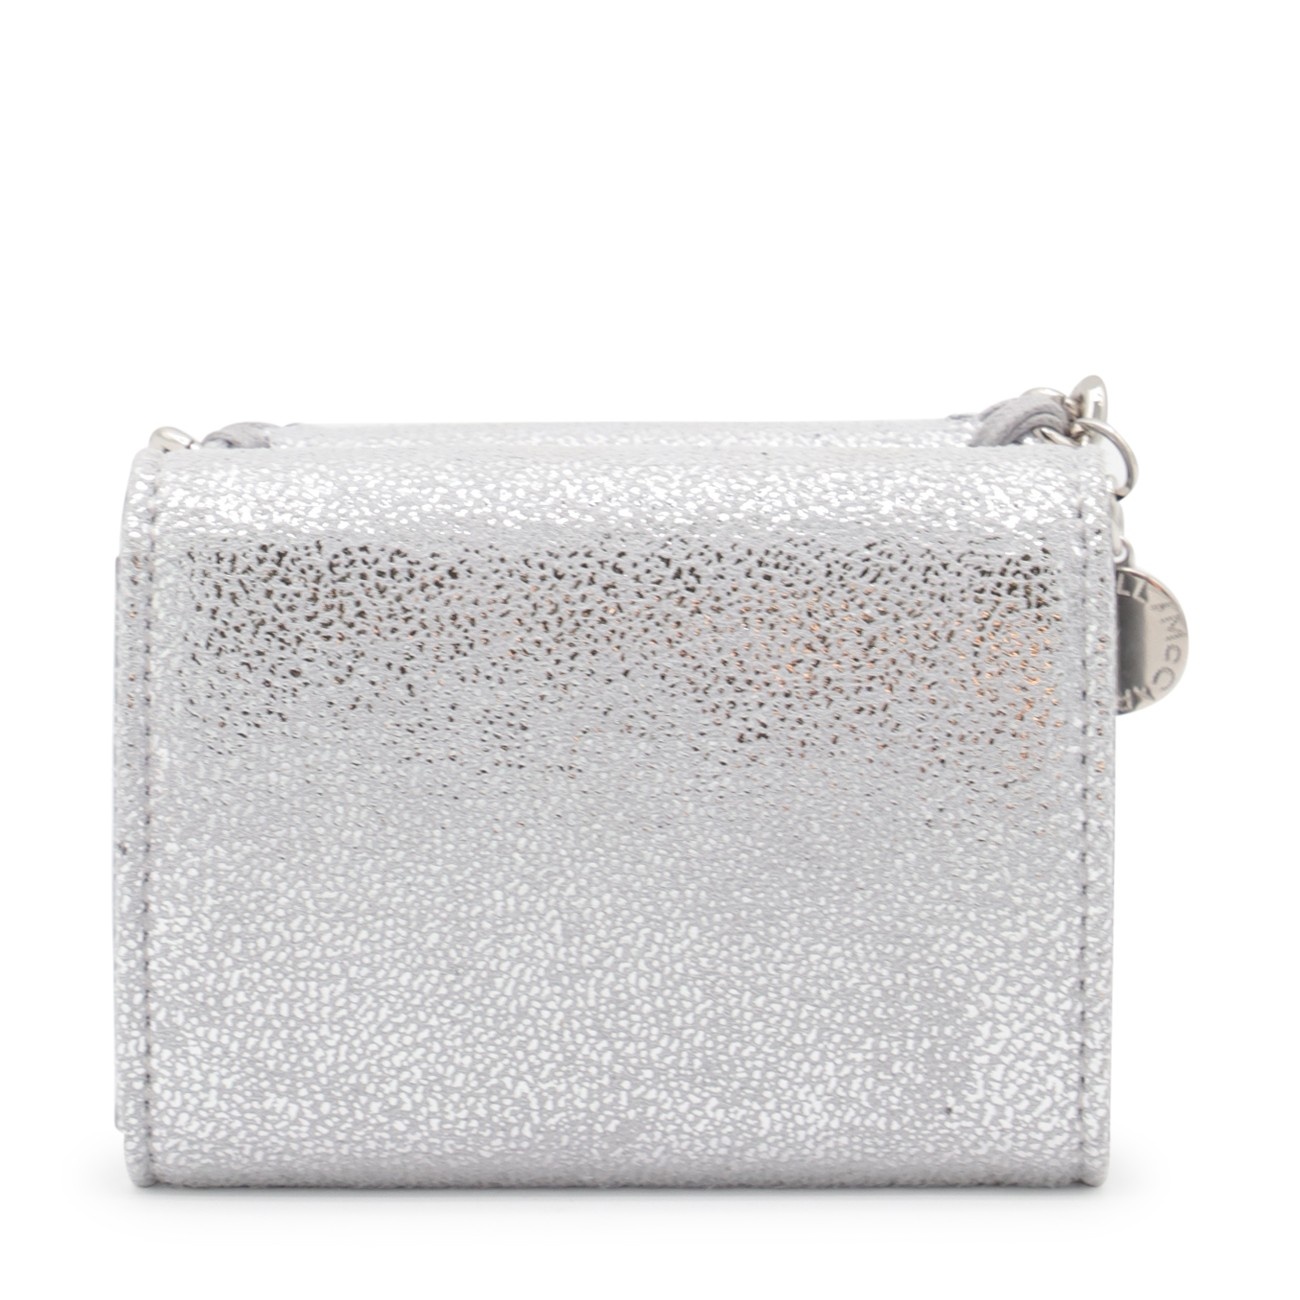 silver faux leather falabella wallet - 3